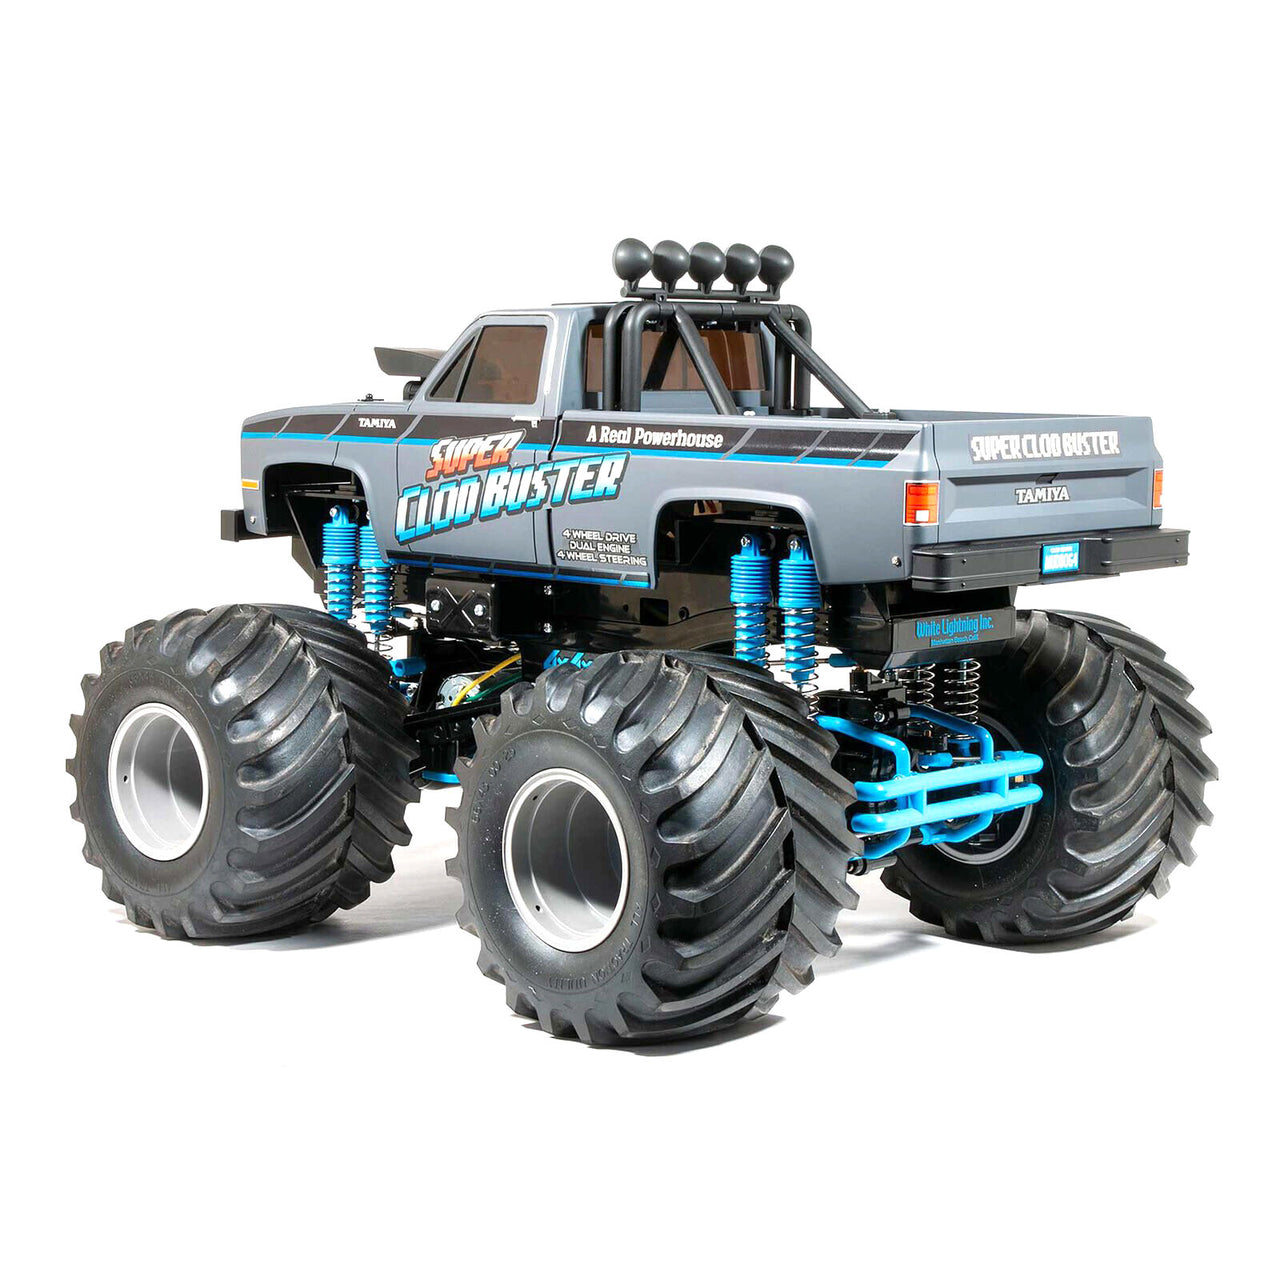 92437 1/10 Super Clod Buster 4X4 Monster Truck Kit, Grey (Limited Edition)